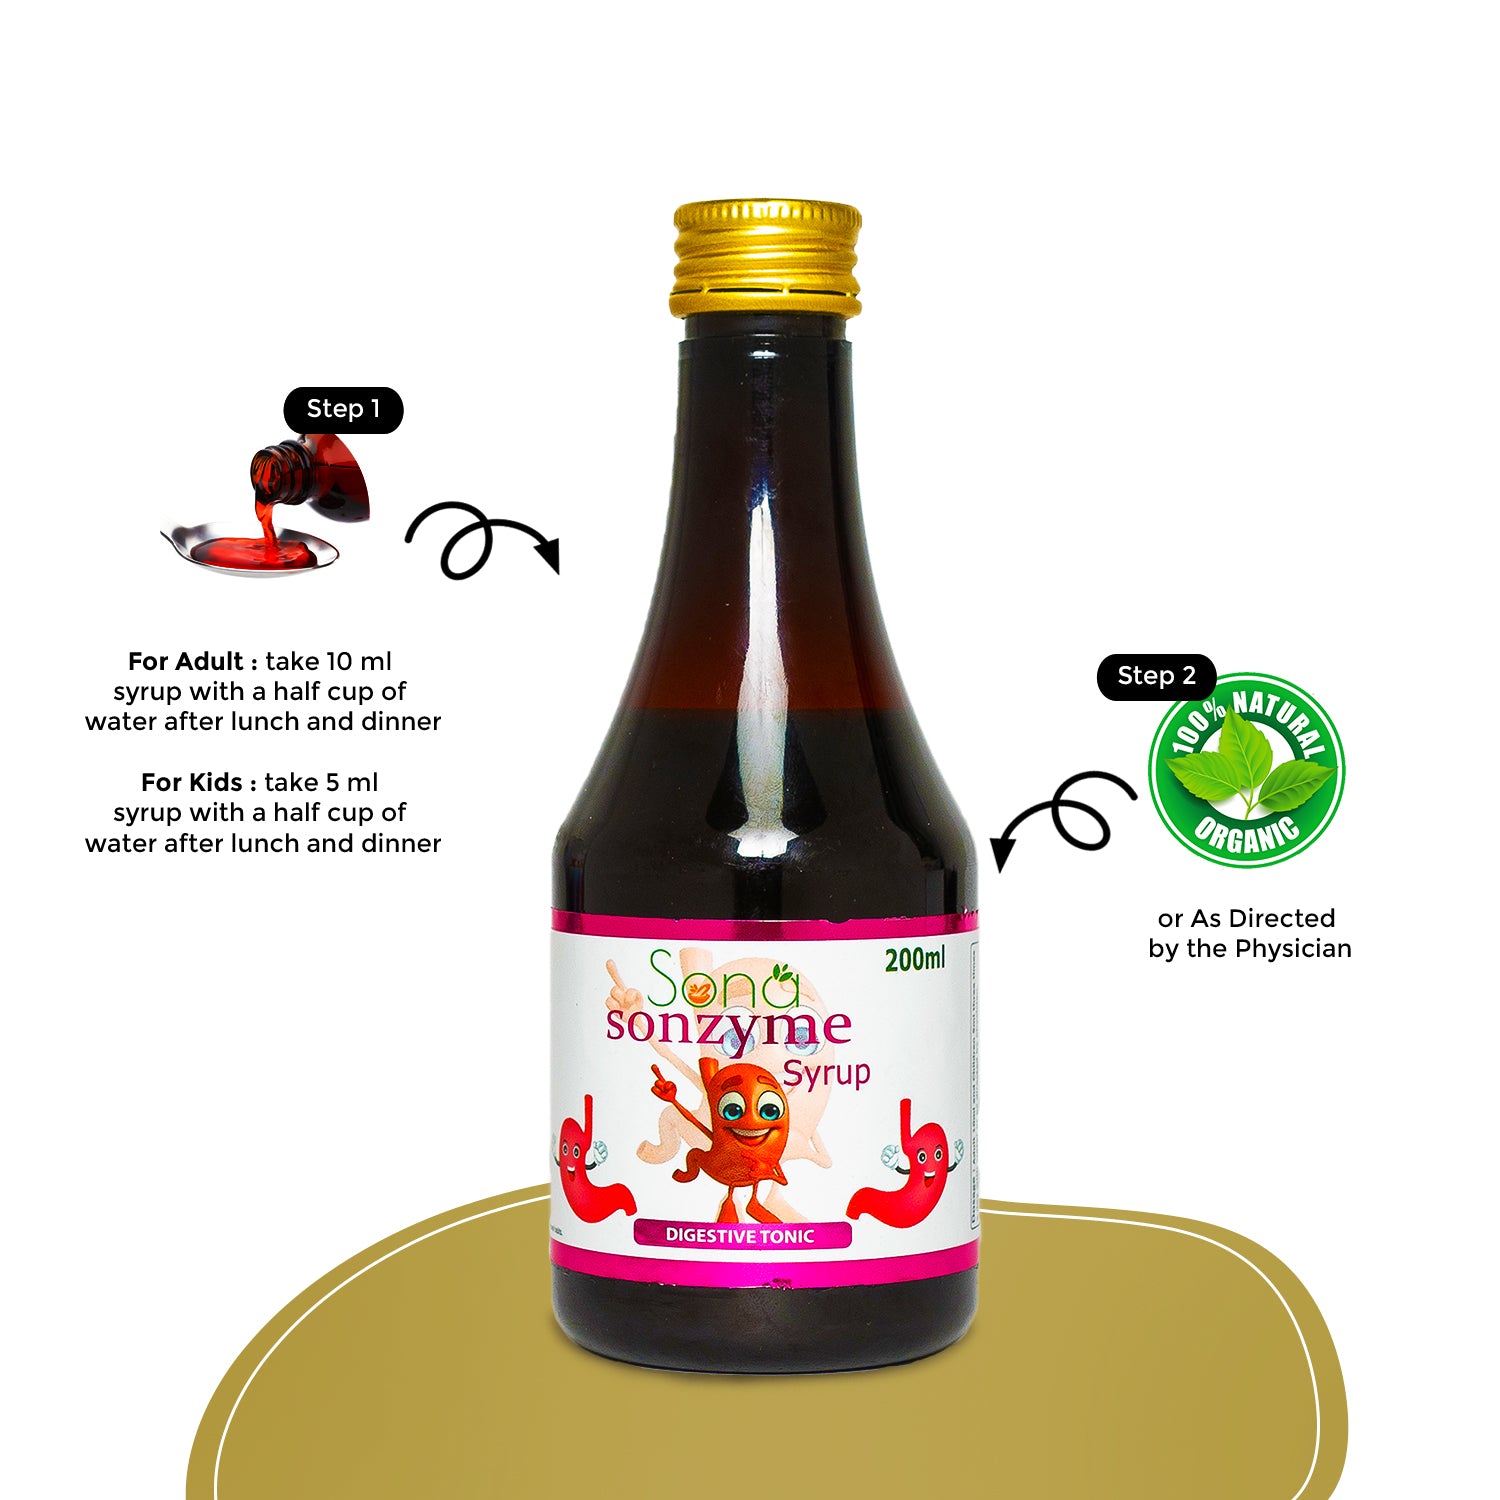 Sona Sonzyme Syrup For Digestion